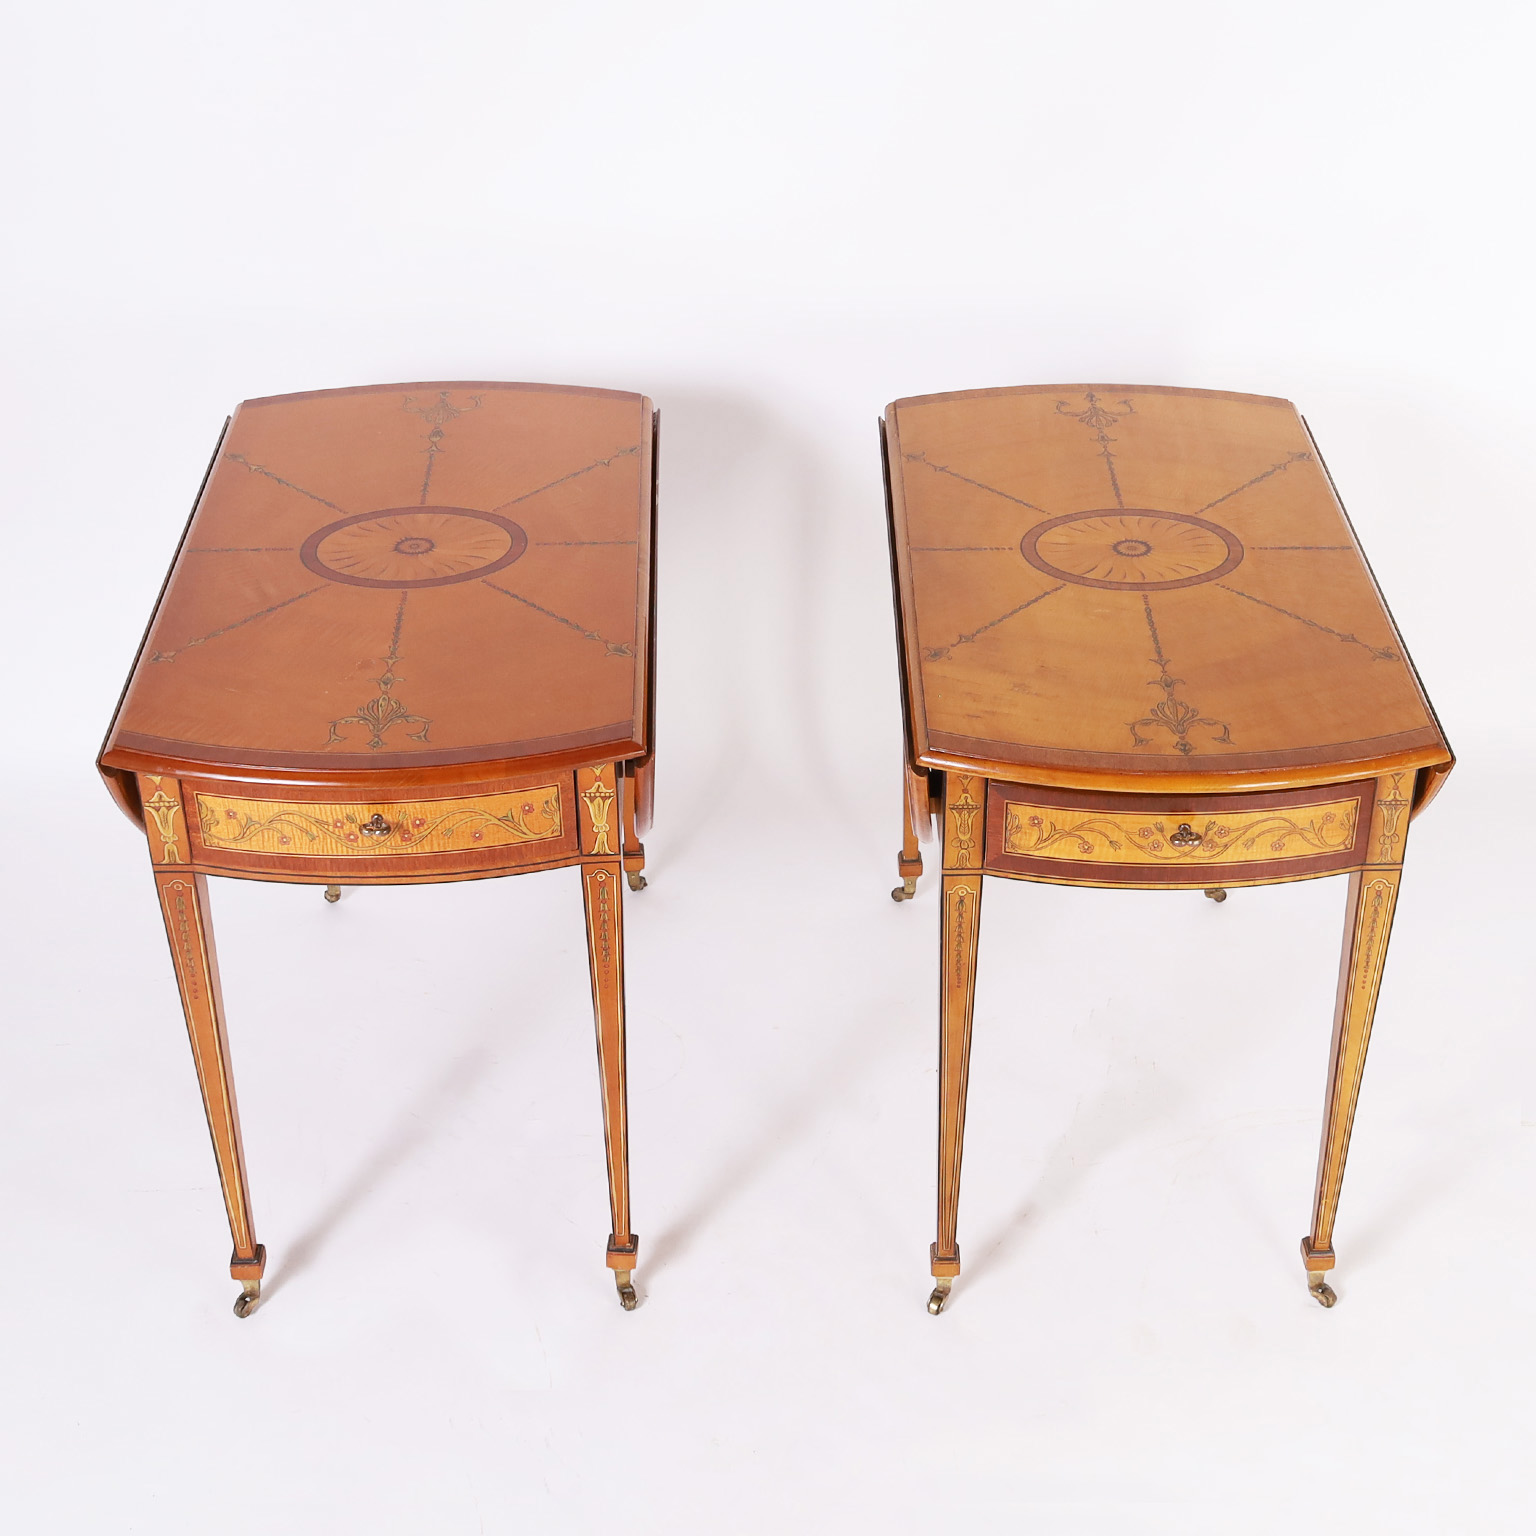 Pair of Vintage Adam Style One Drawer Drop Leaf Tables or Stands